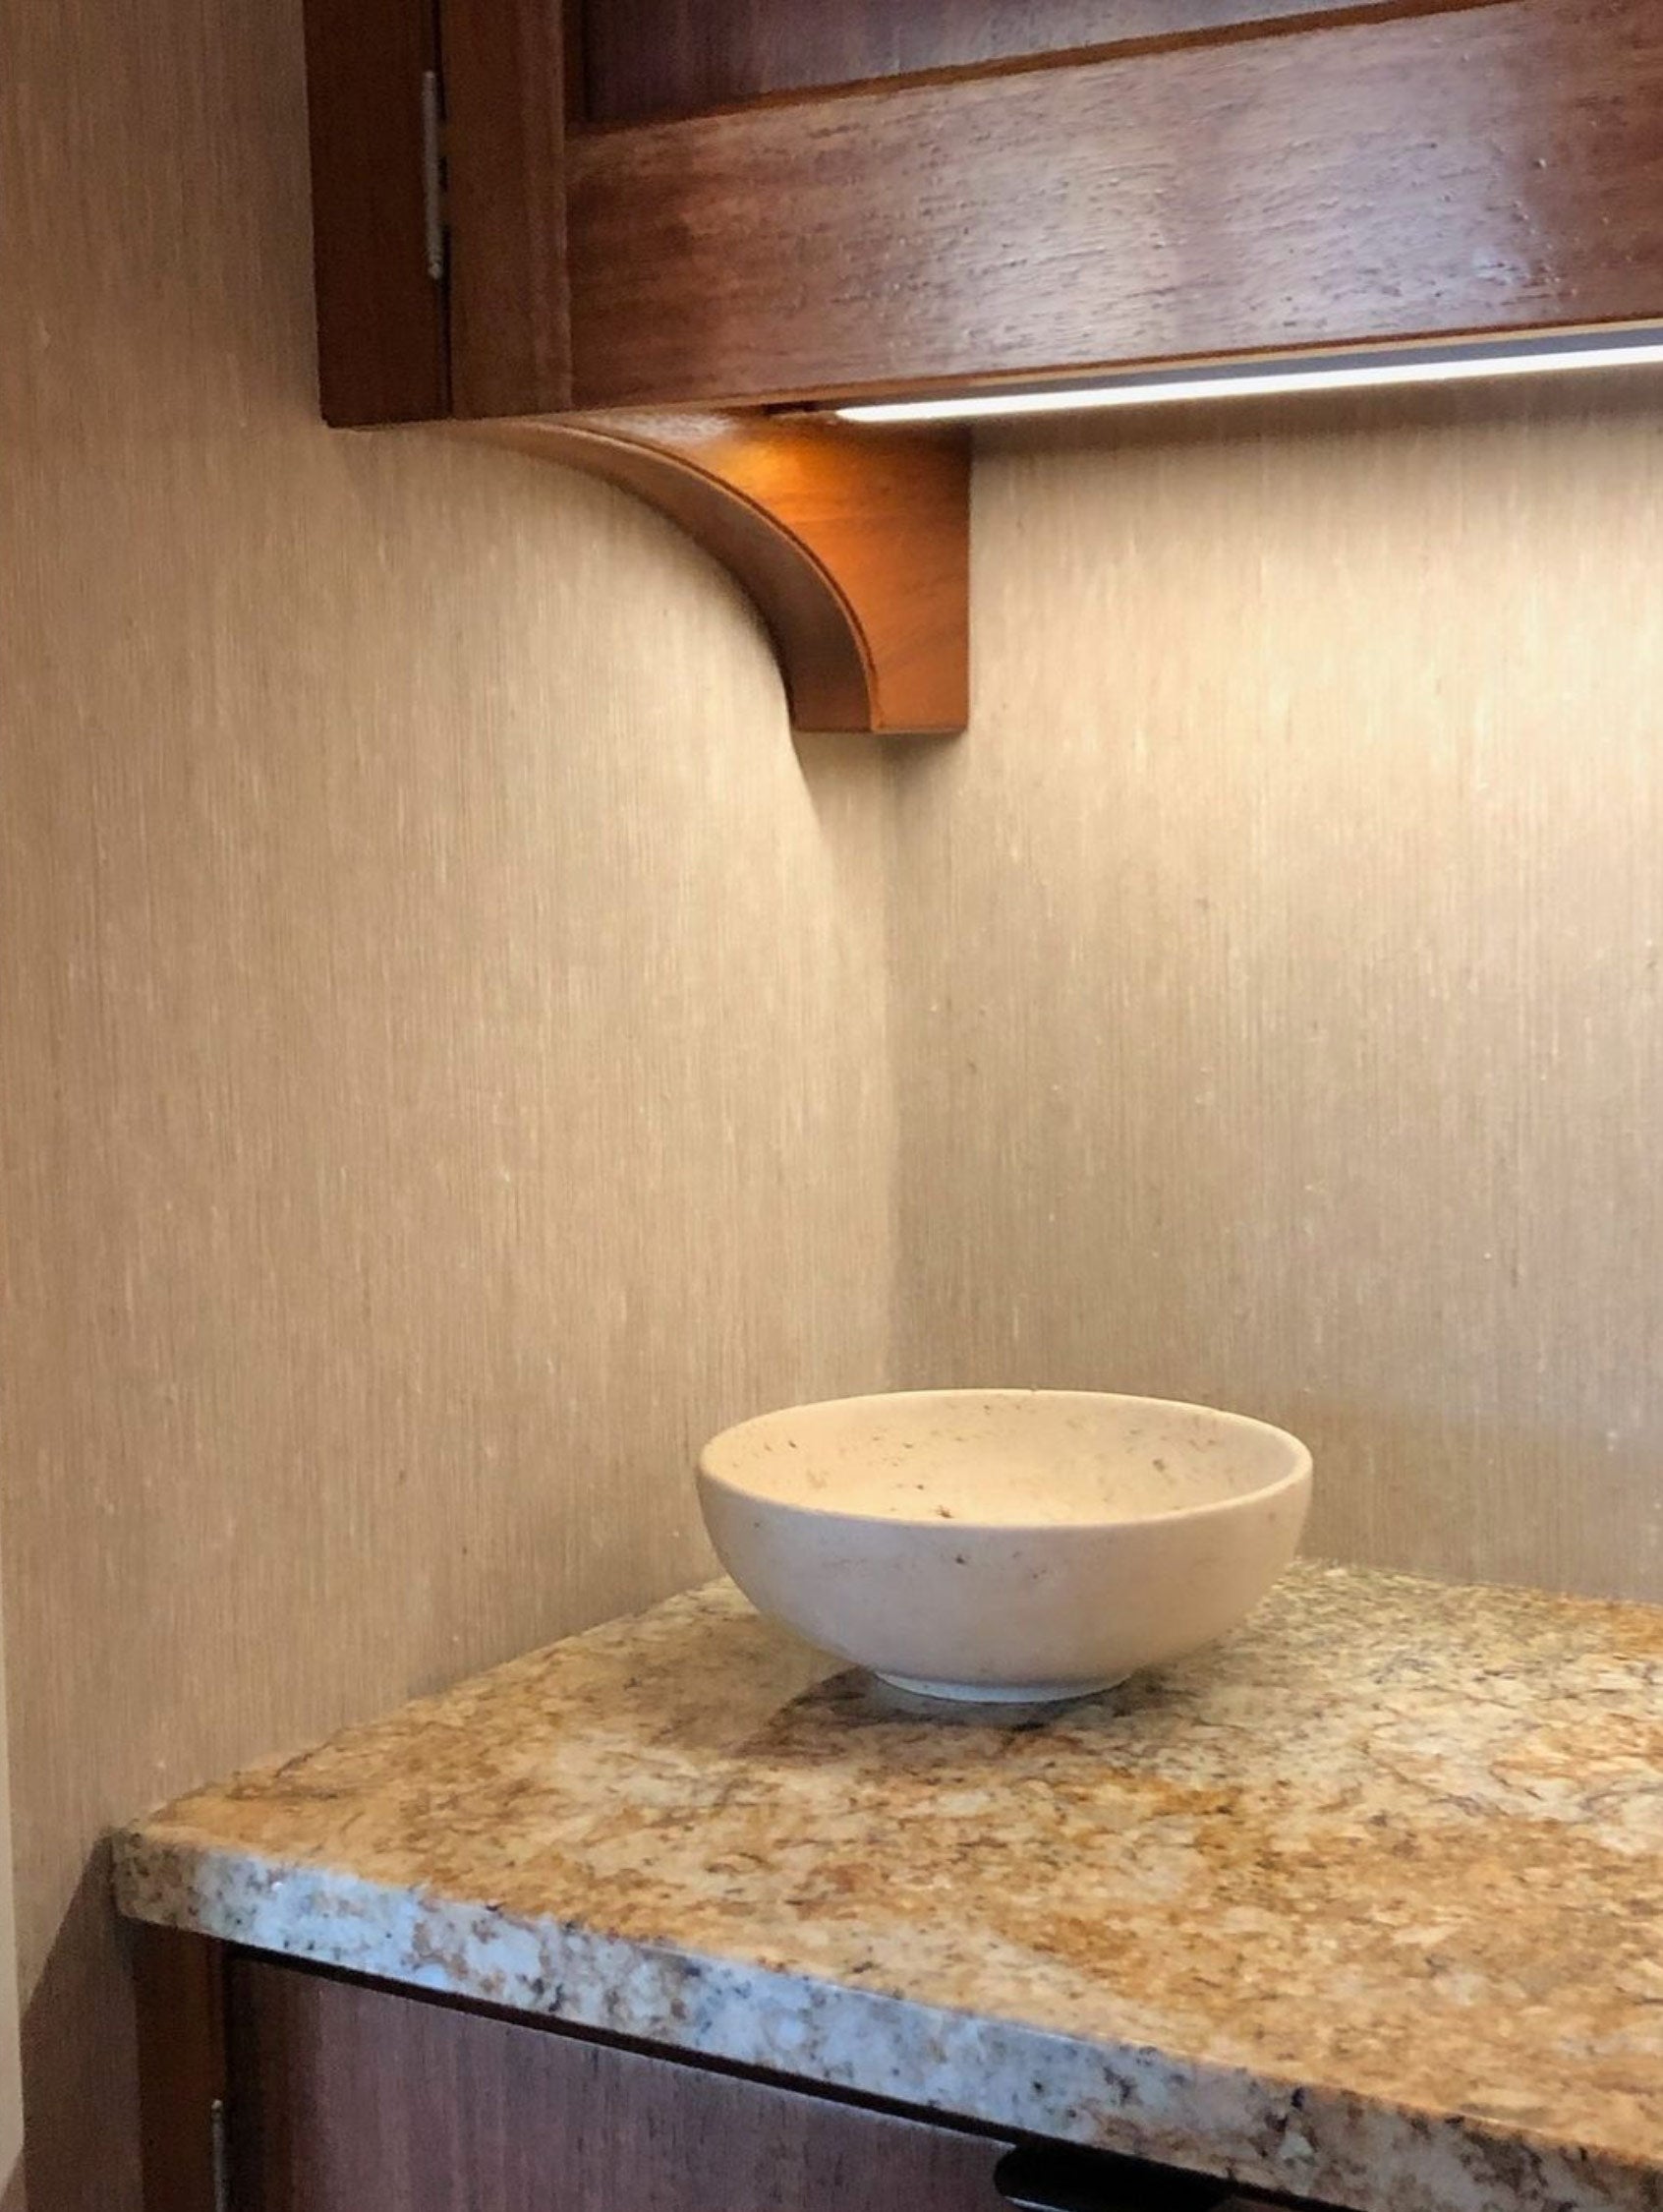 Closeup corner image of a neutral-toned natural wallcovering under a cabinet shelf. Small white bowl on countertop